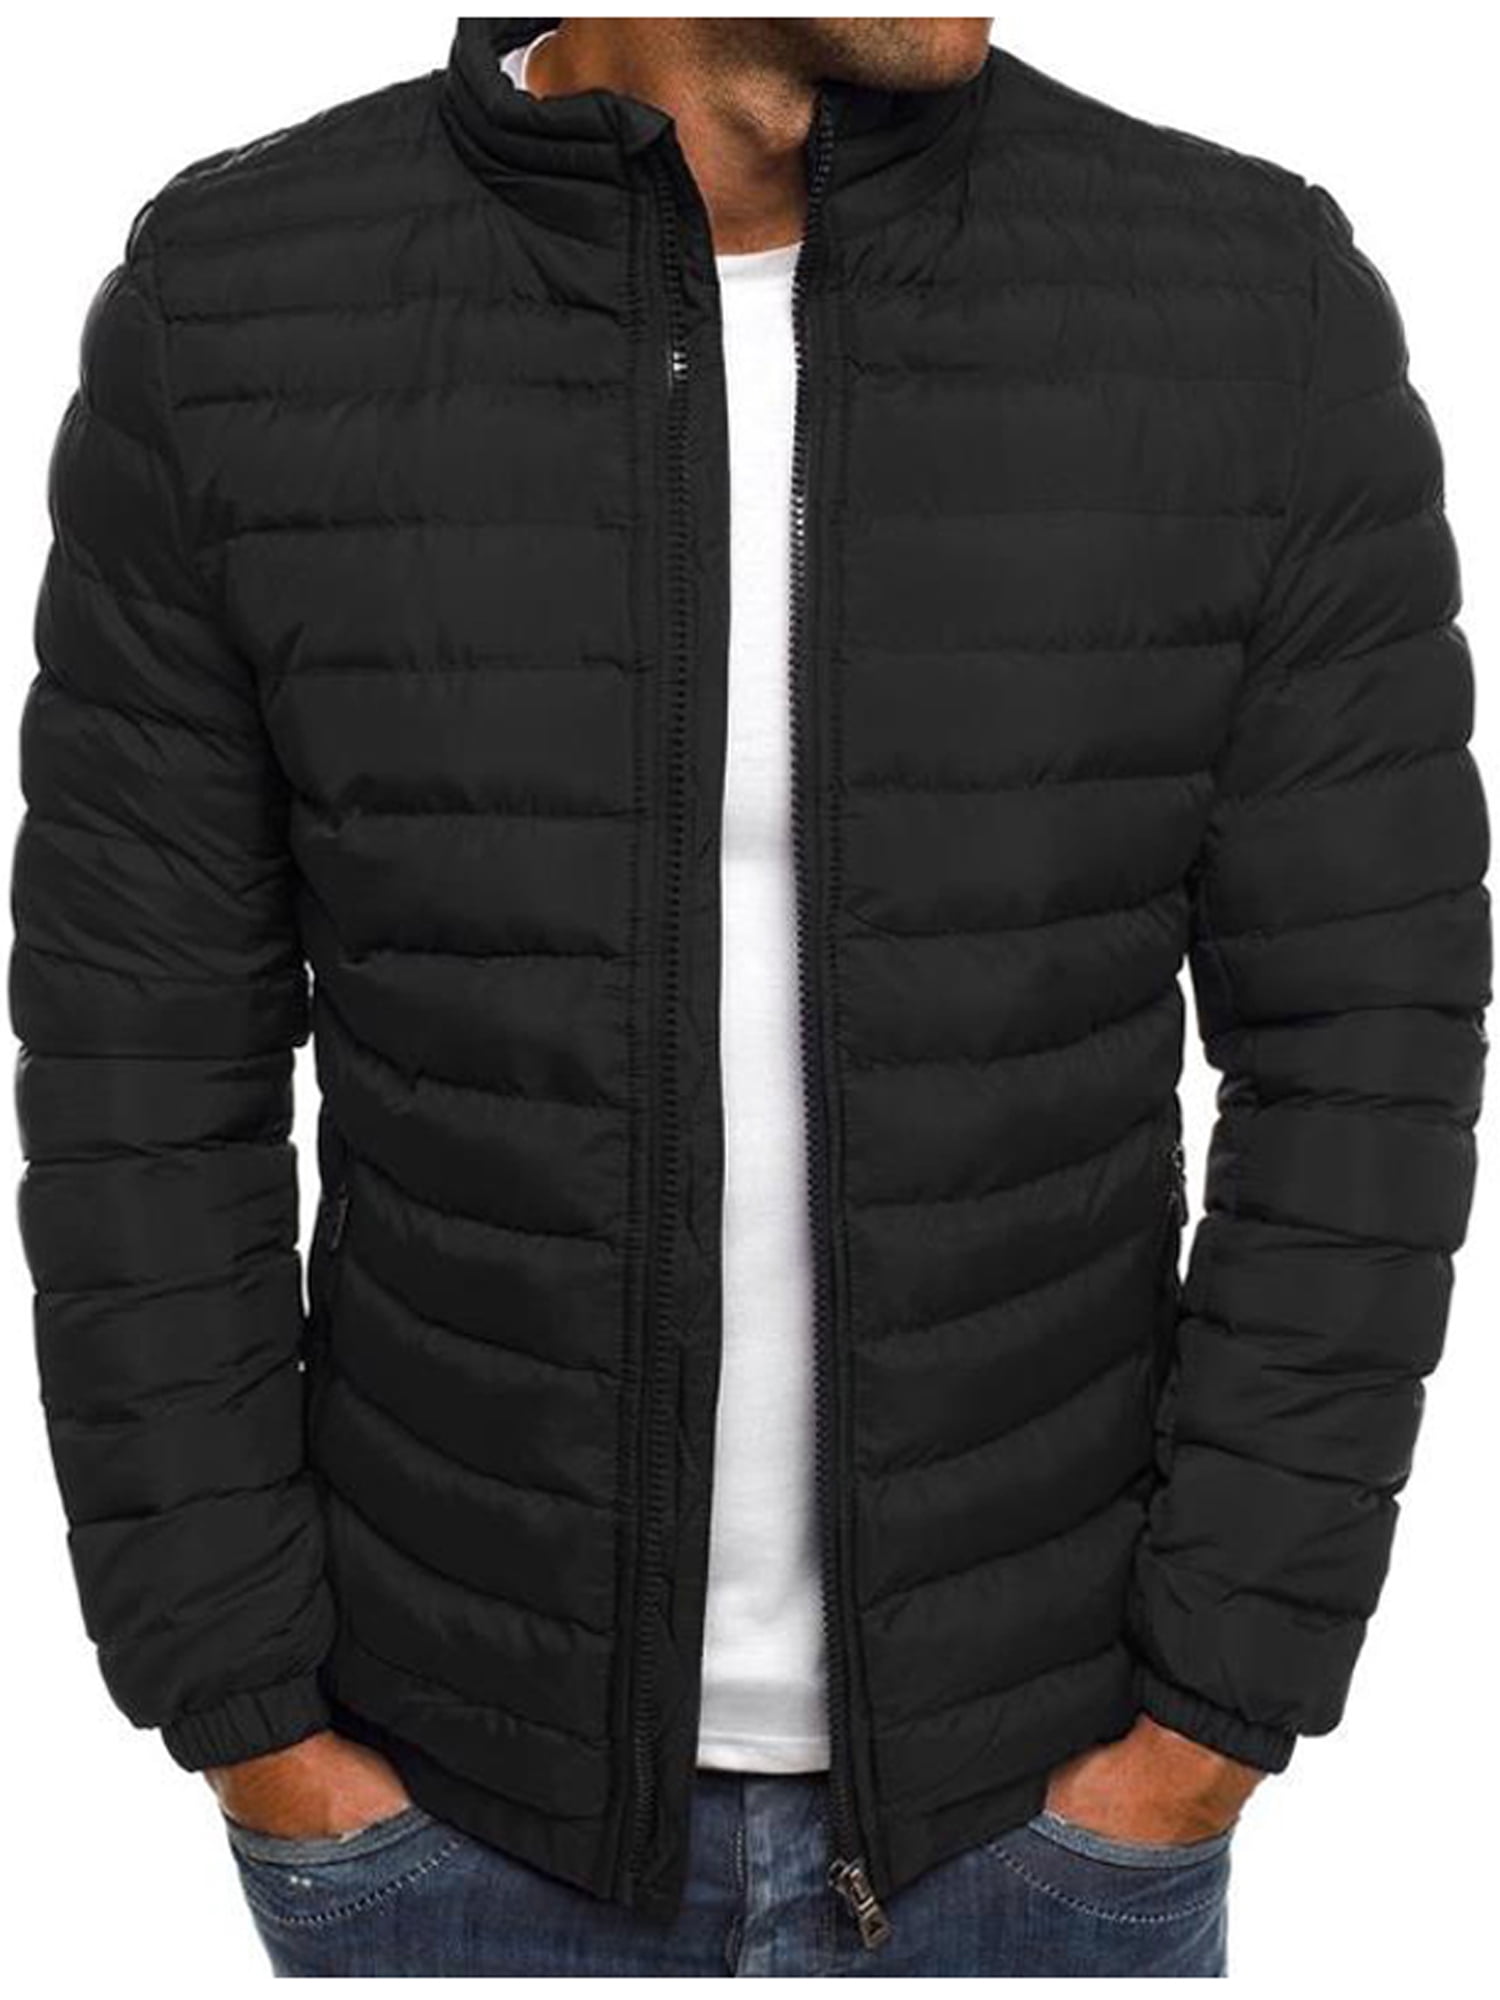 .Mens Puffer Bubble Down Jacket Coat Winter Warm Quilted Padded Parka Outwear. 